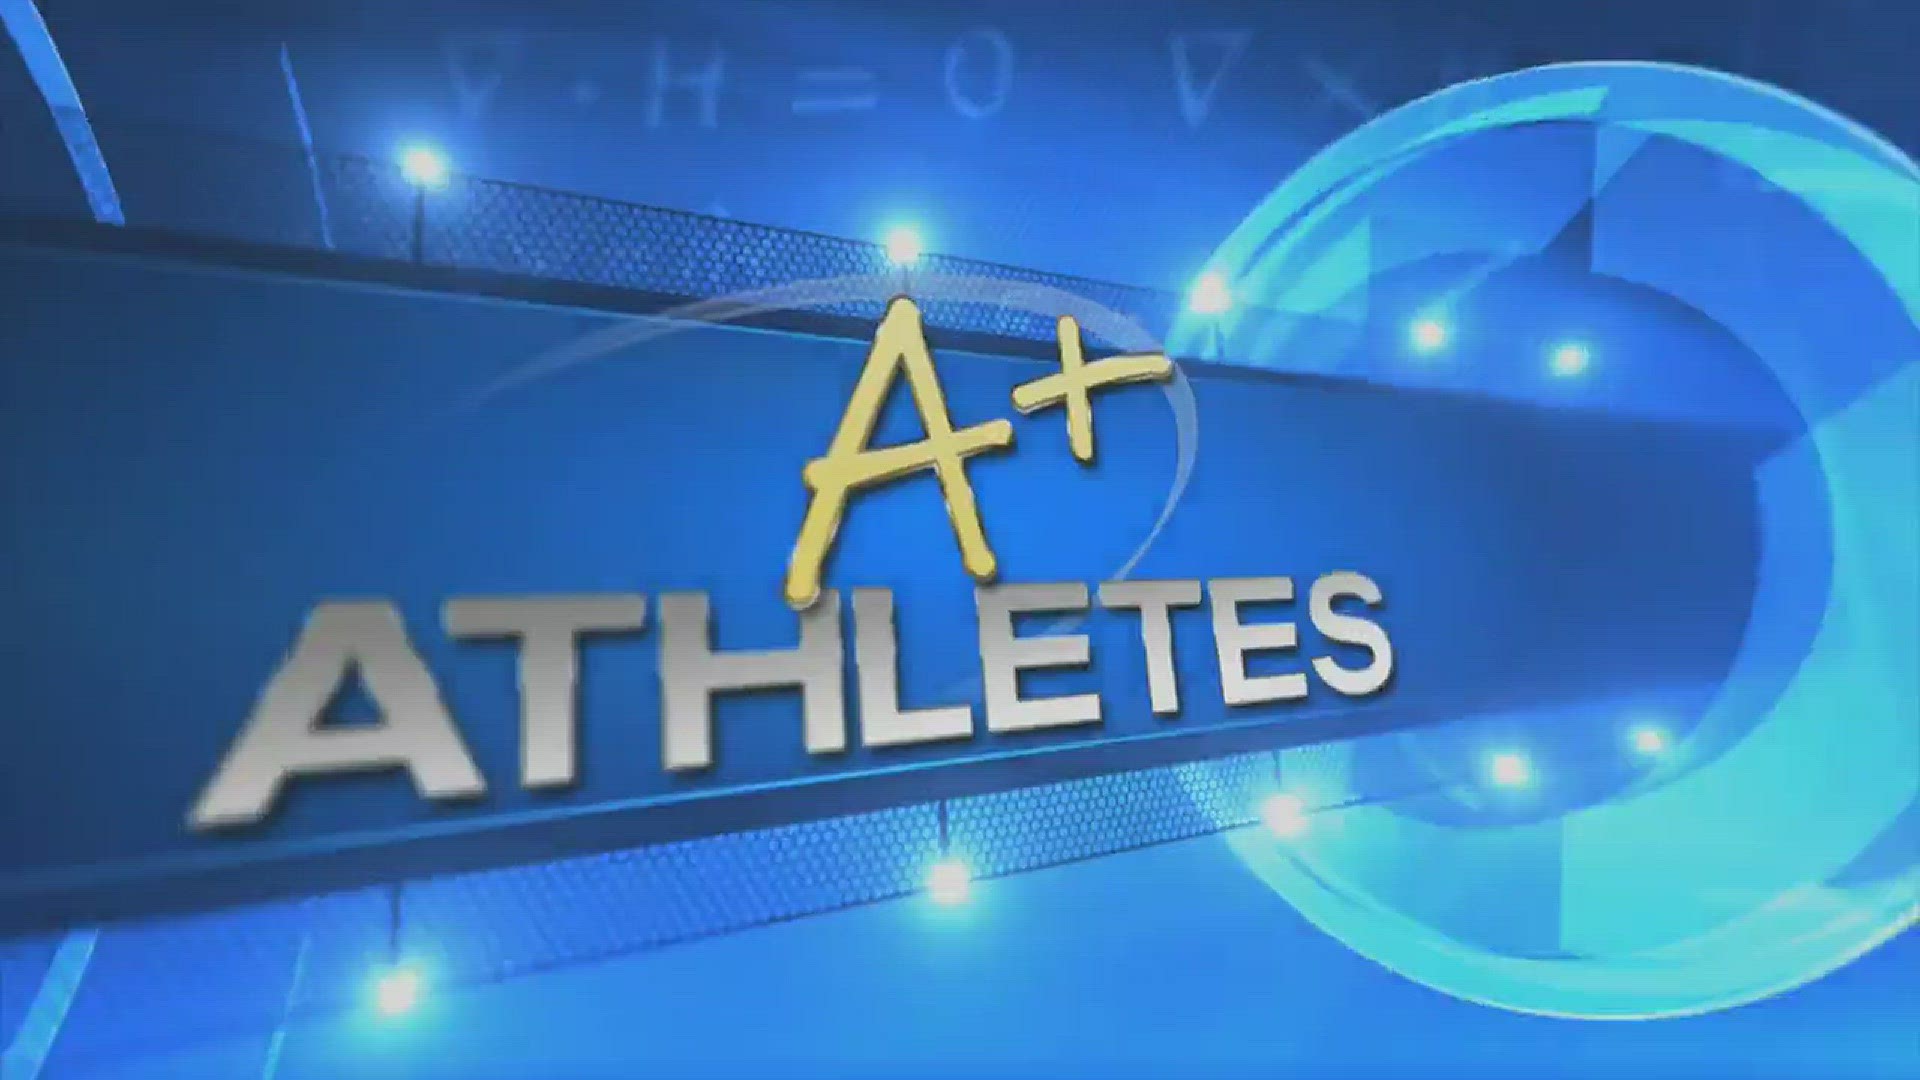 Michaela Matherne is one of our A+ Athletes of the Year.